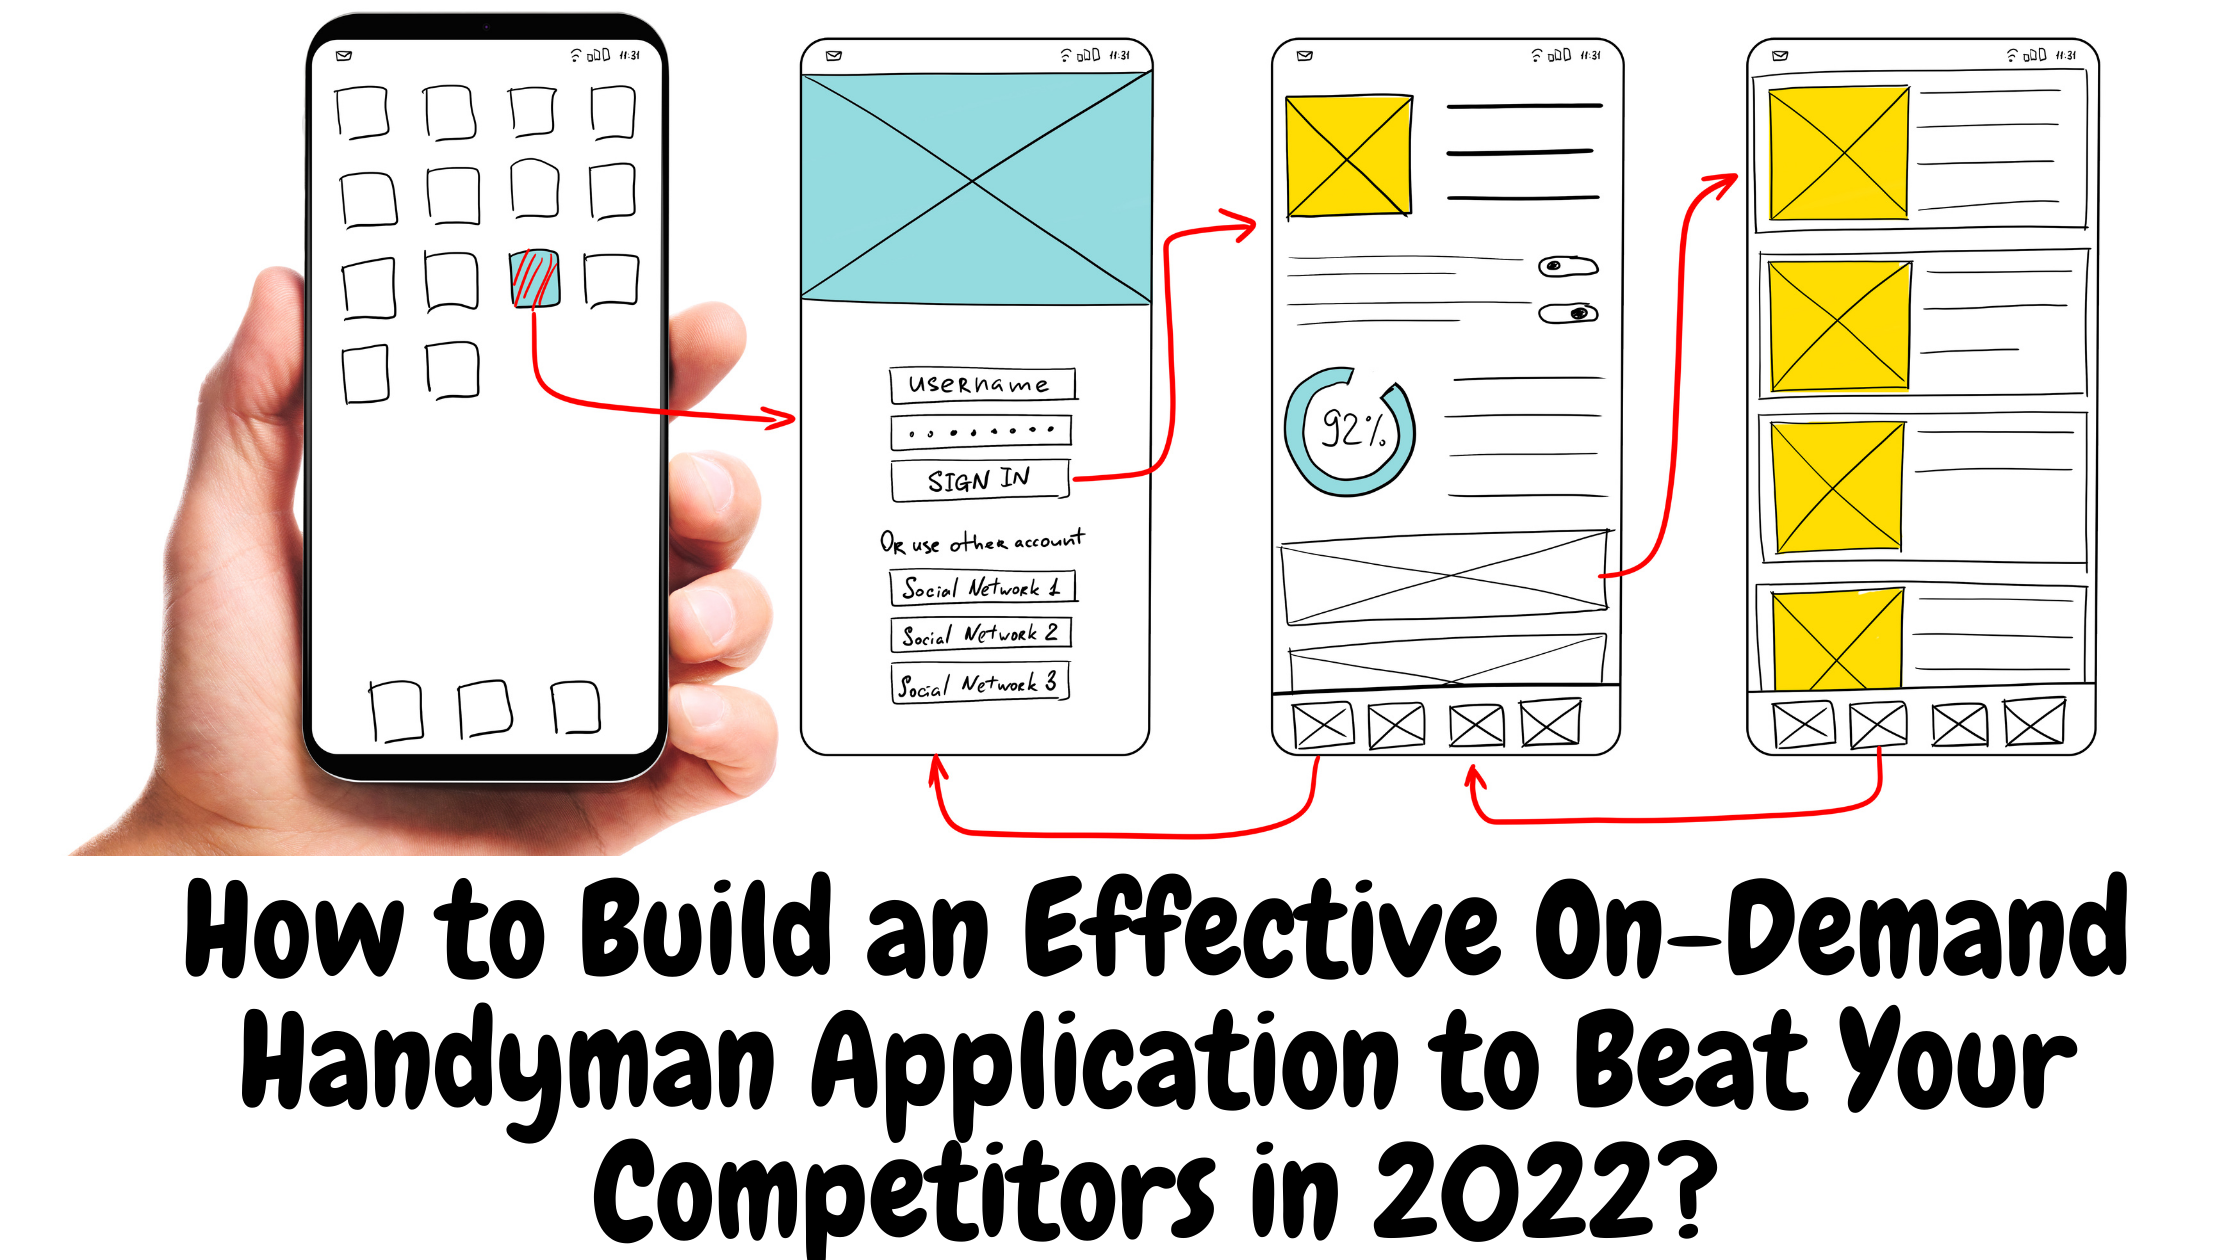 How to Build an Effective On-Demand Handyman Application to Beat Your Competitors in 2022?